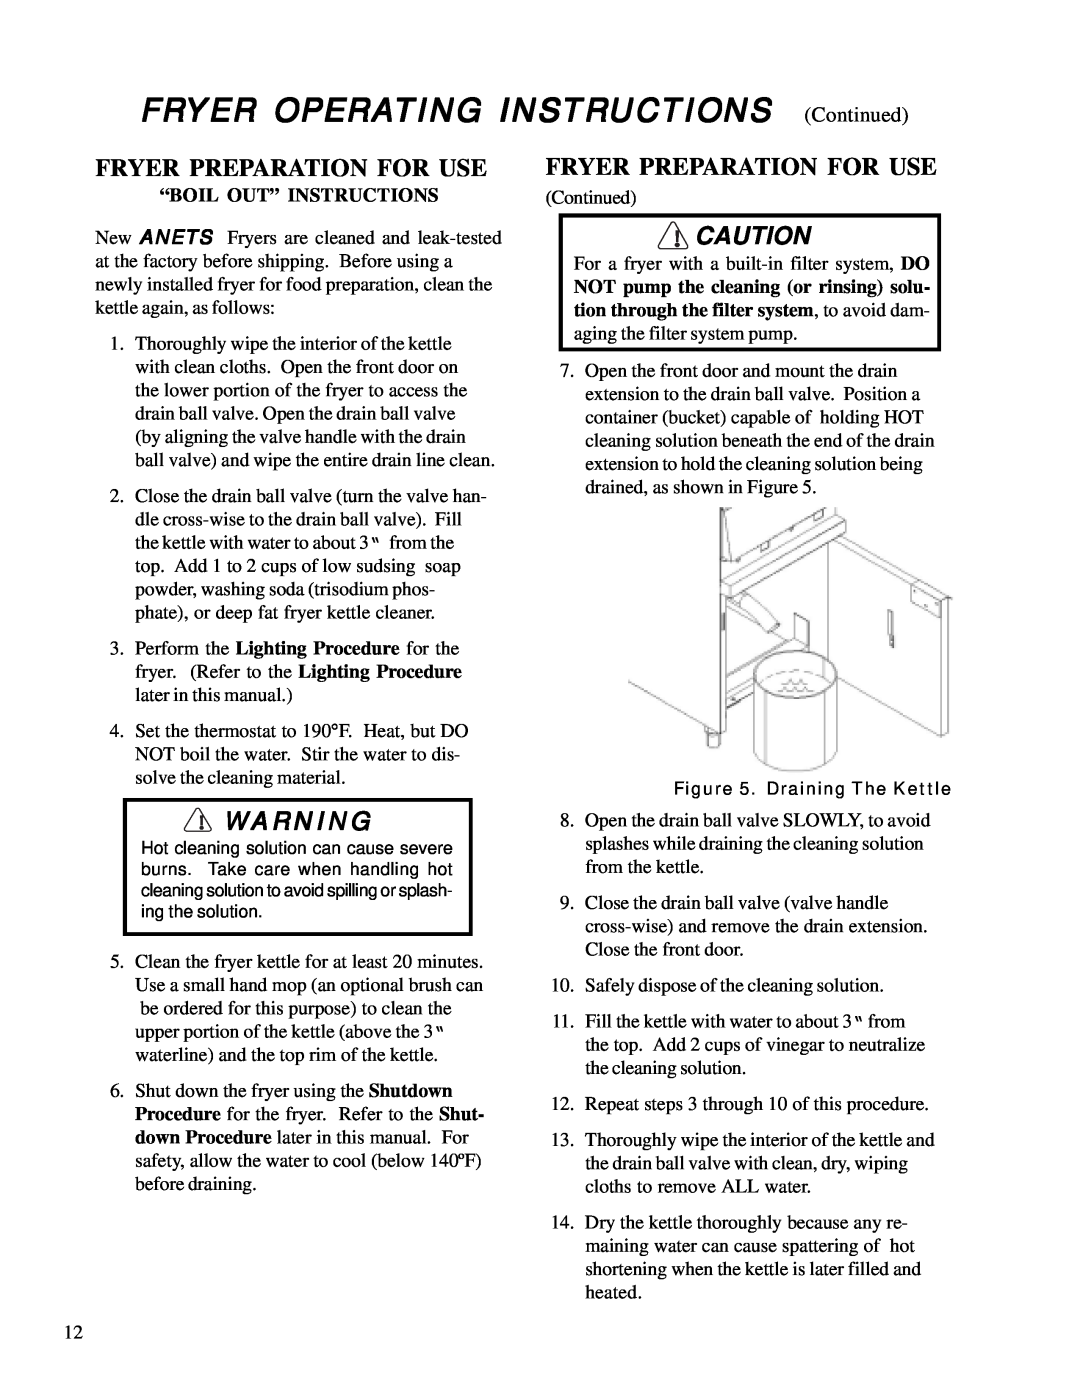 Anetsberger Brothers MX-7E FRYER OPERATING INSTRUCTIONS Continued, Fryer Preparation For Use, “Boil Out” Instructions 